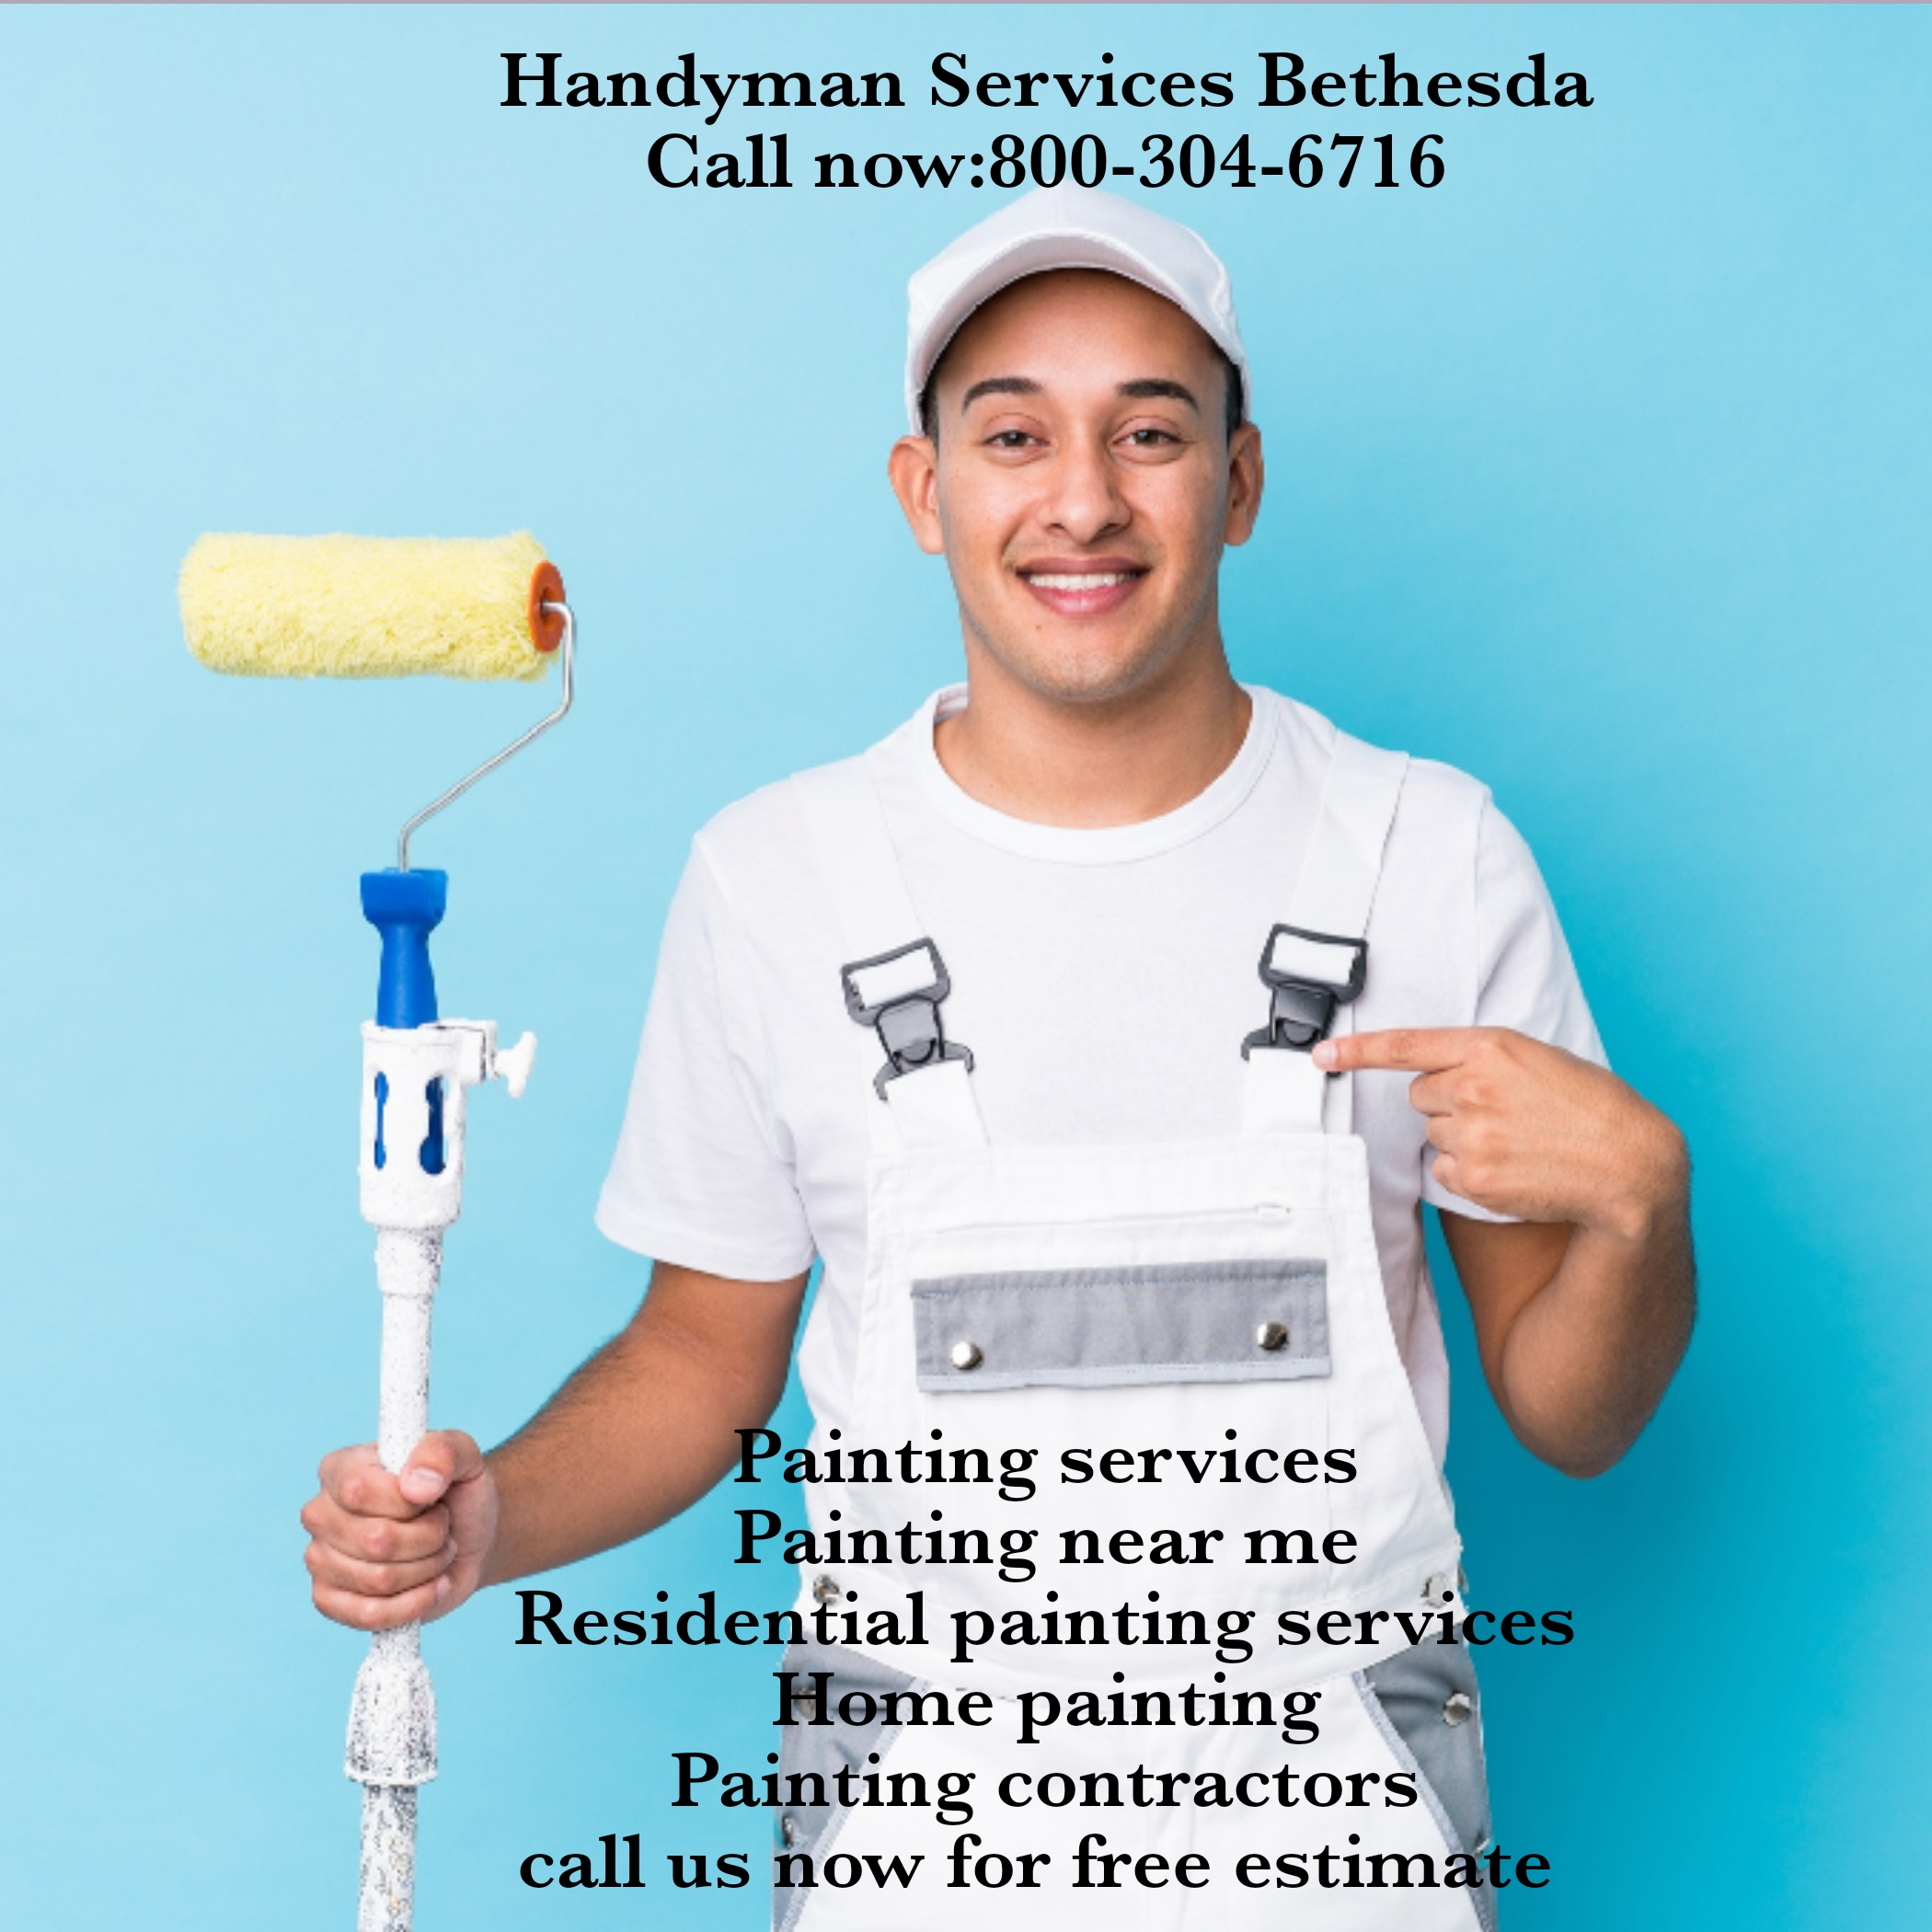 “Transform Your Home with Professional Interior and Exterior Painting Services”